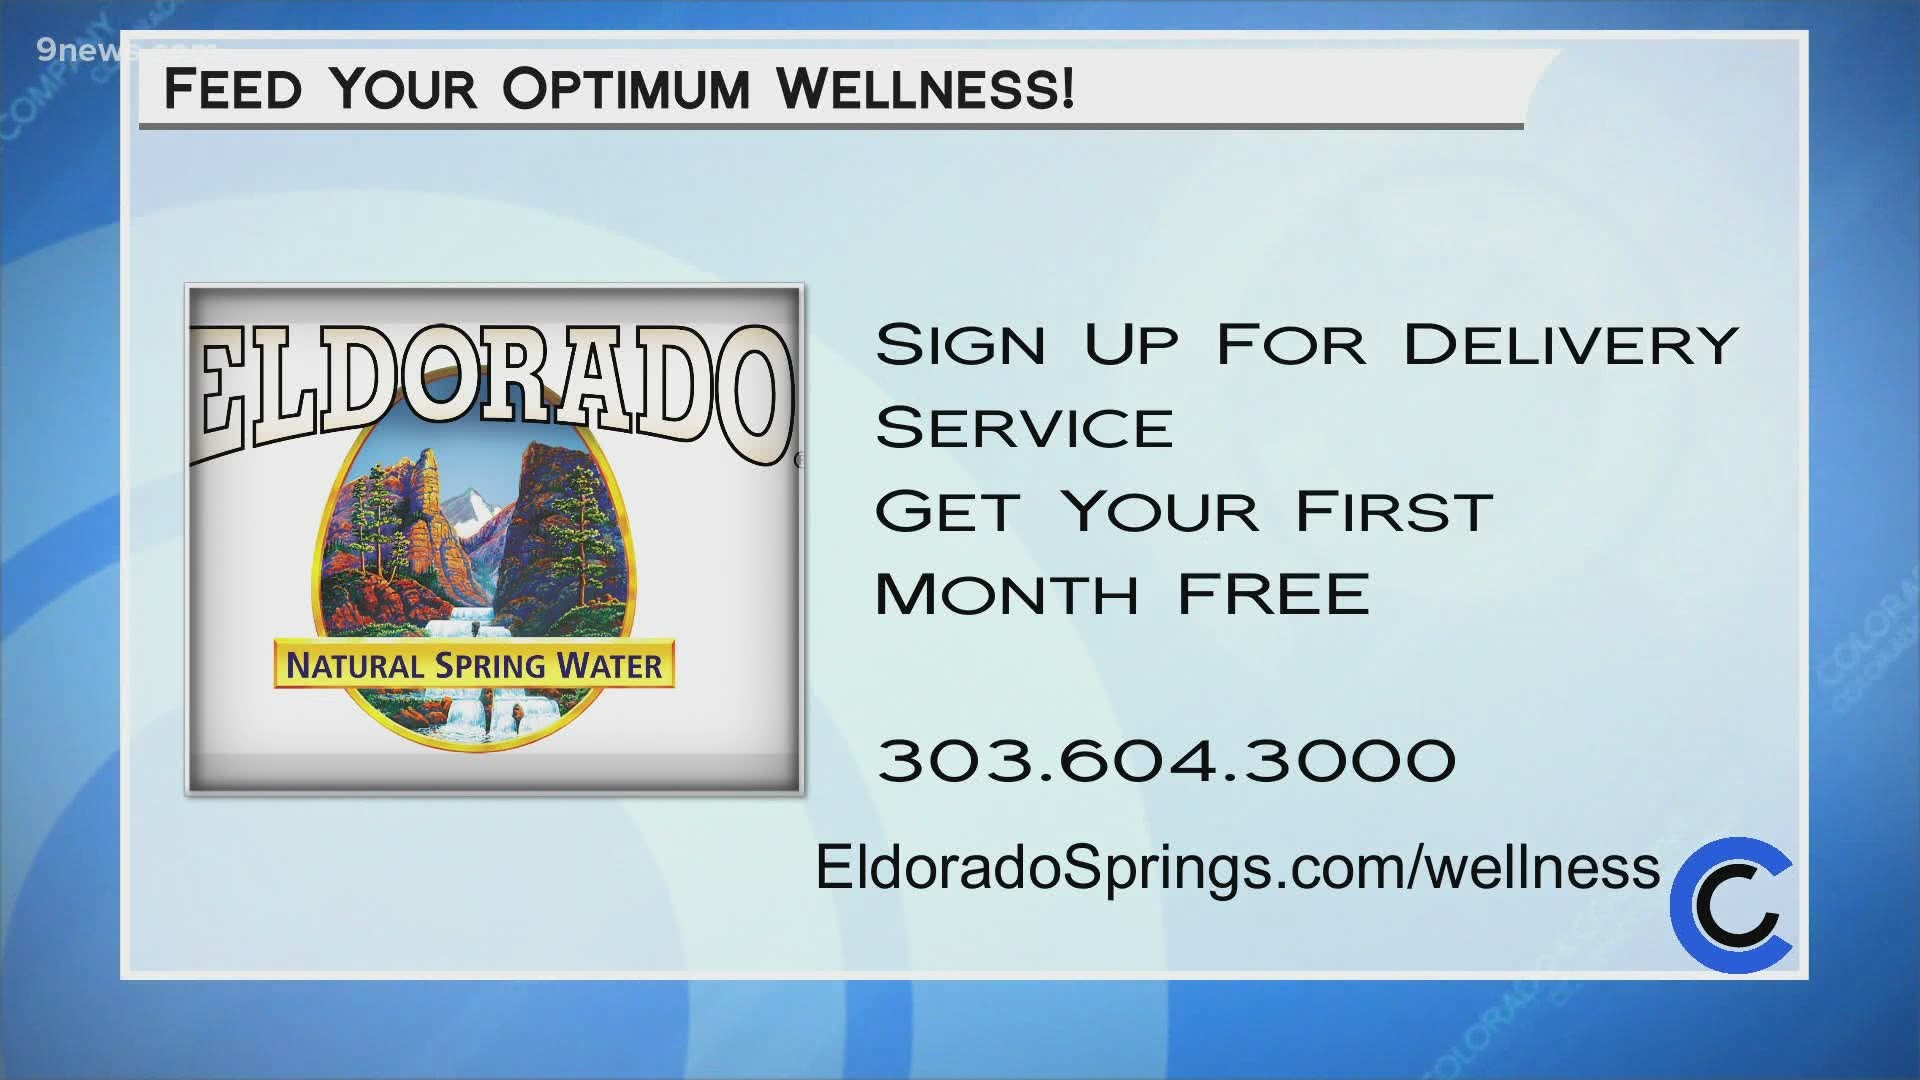 Find Eldorado Natural Spring Water at King Soopers, your home for Optimum Wellness. You can also check out EldoradoSprings.com/Wellness.